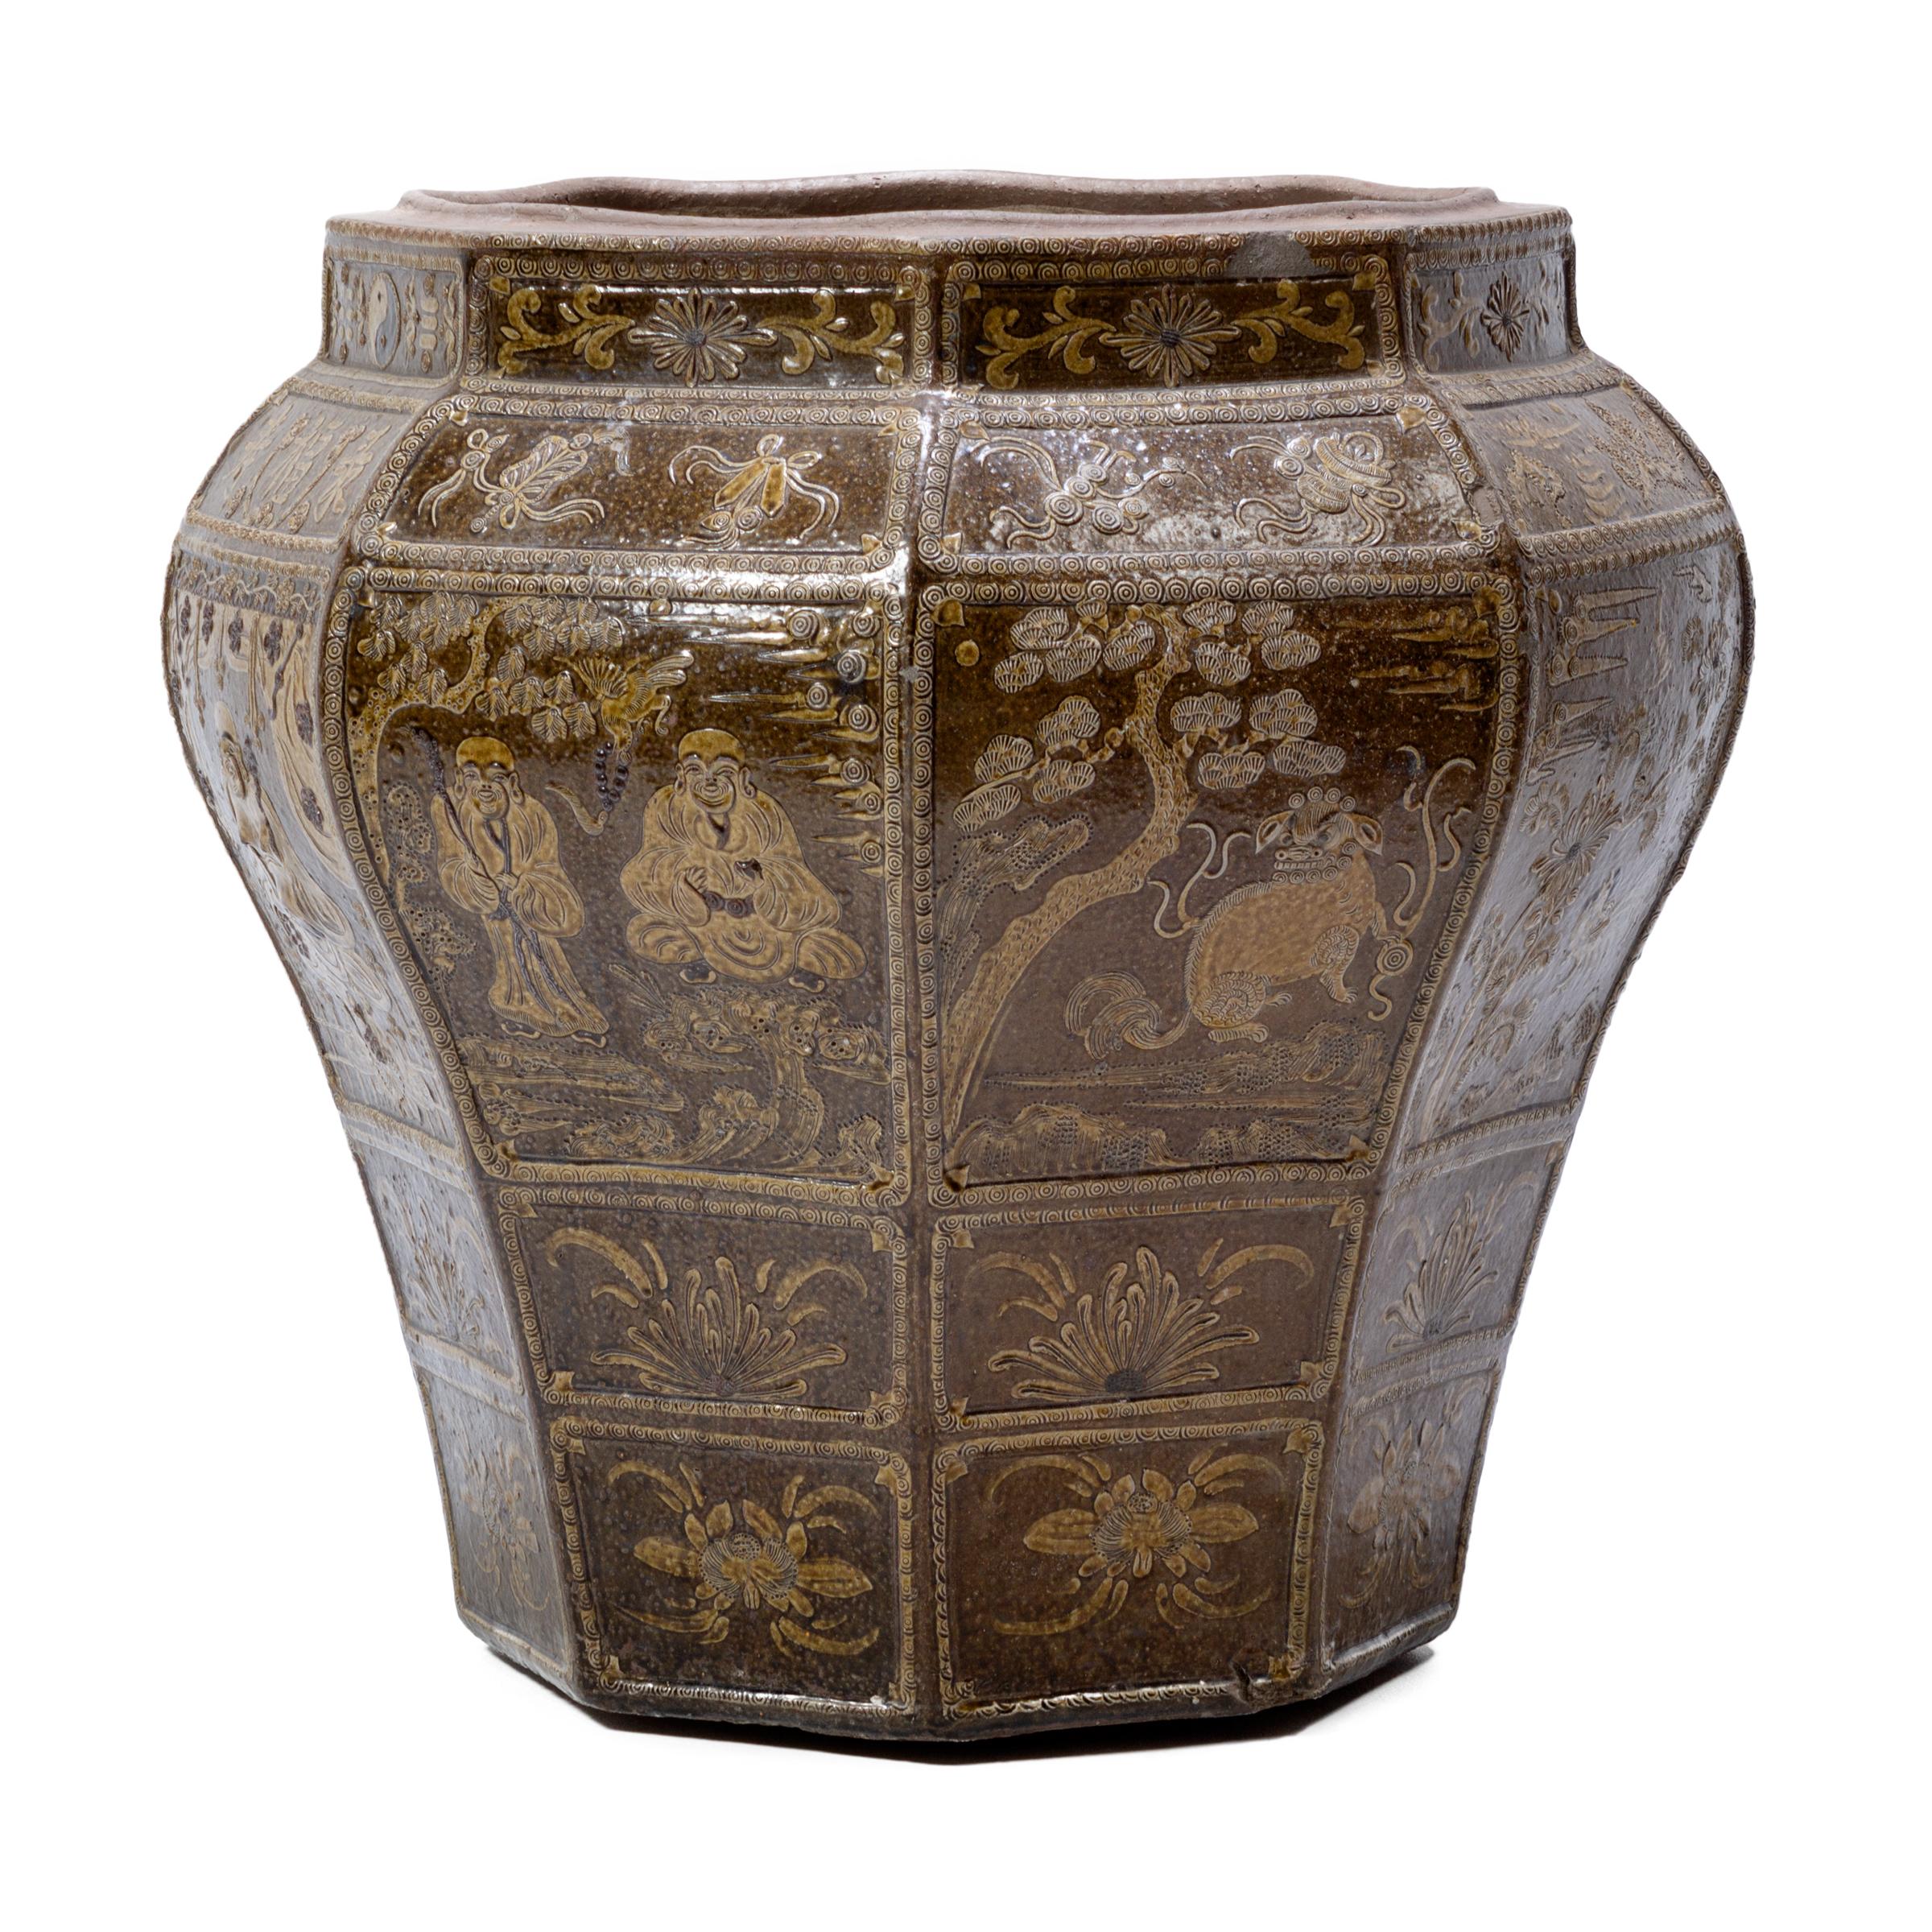 This monumental early 19th century finely glazed Chinese urn is eight-sided, an auspicious number of good fortune. Intricate paintings on its surface depict respected Taoist deities and immortals who redeem all creatures, as well as Taoist symbols